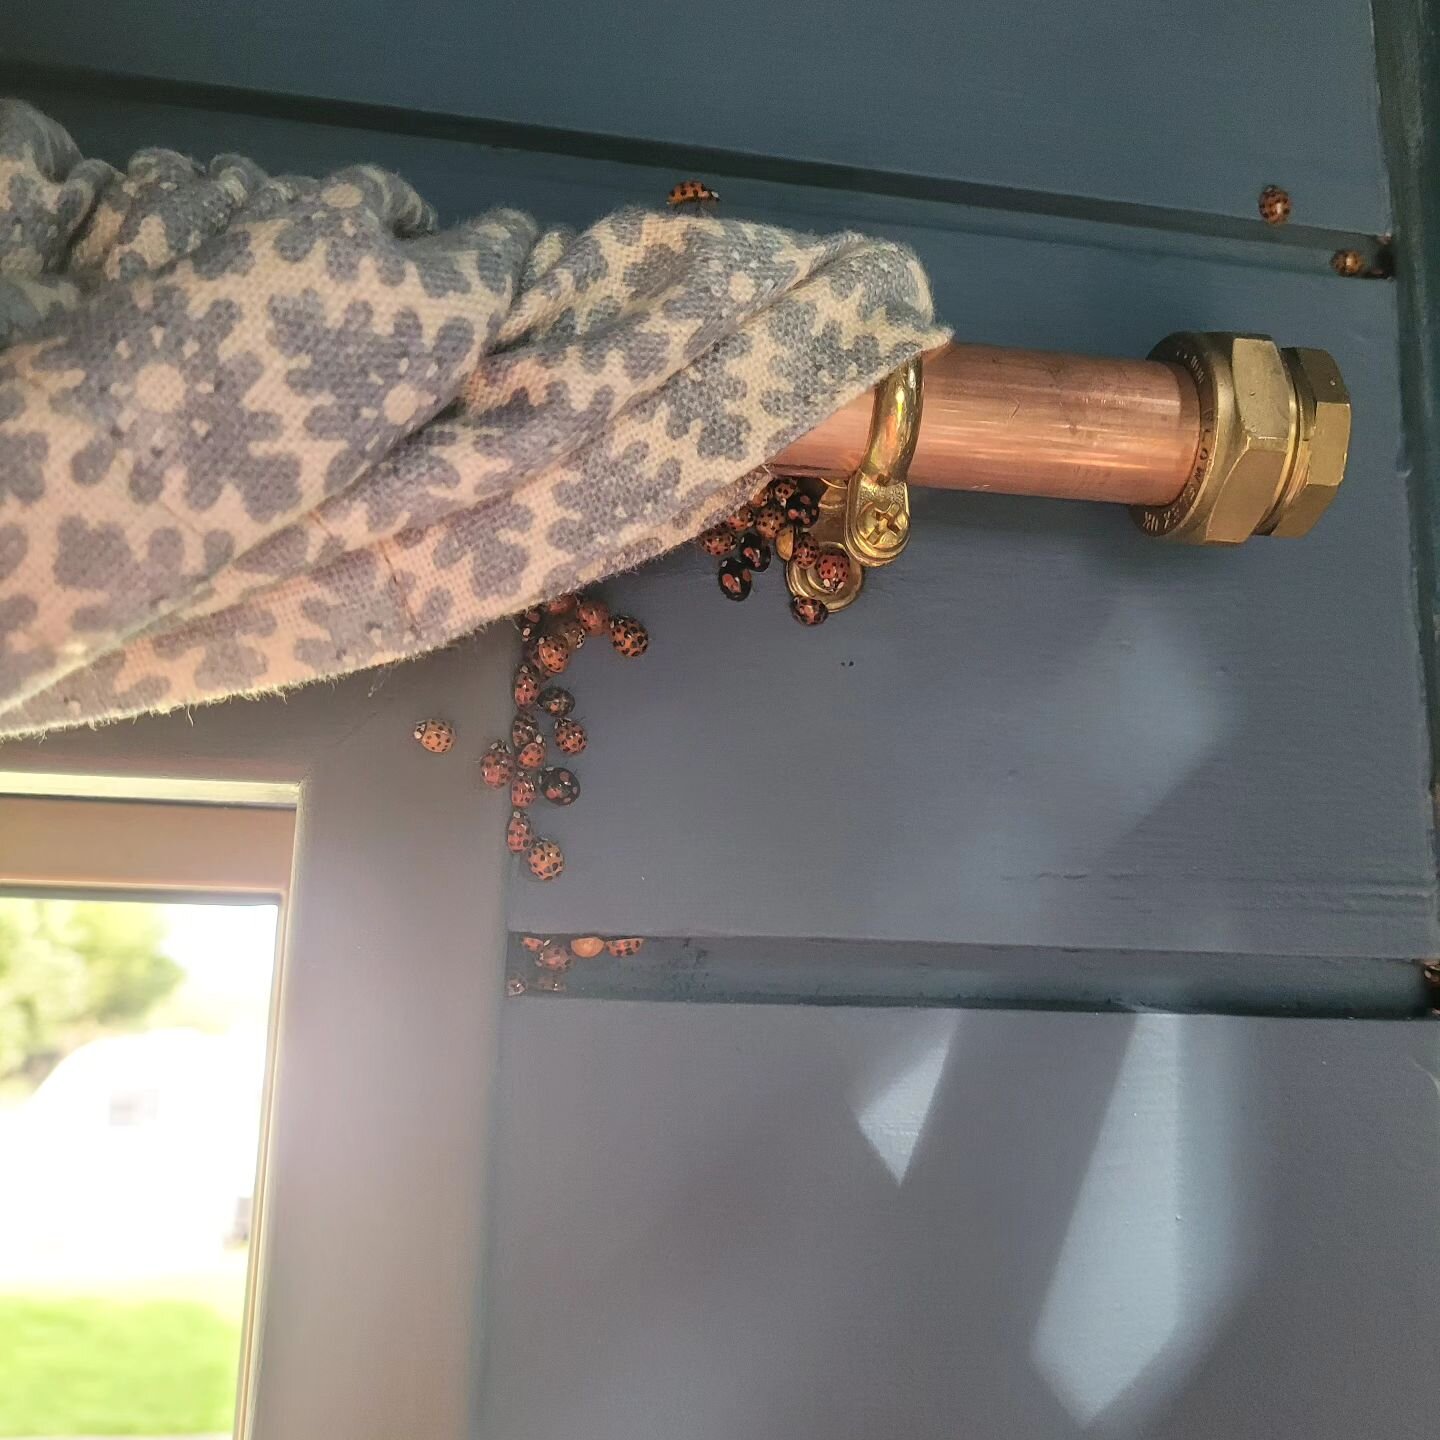 Although we love nature, and I agree that the Housebox would be a very classy place to hibernate. Unfortunately, these ladybirds exceeded our maximum guest numbers and so have been gently asked to leave.